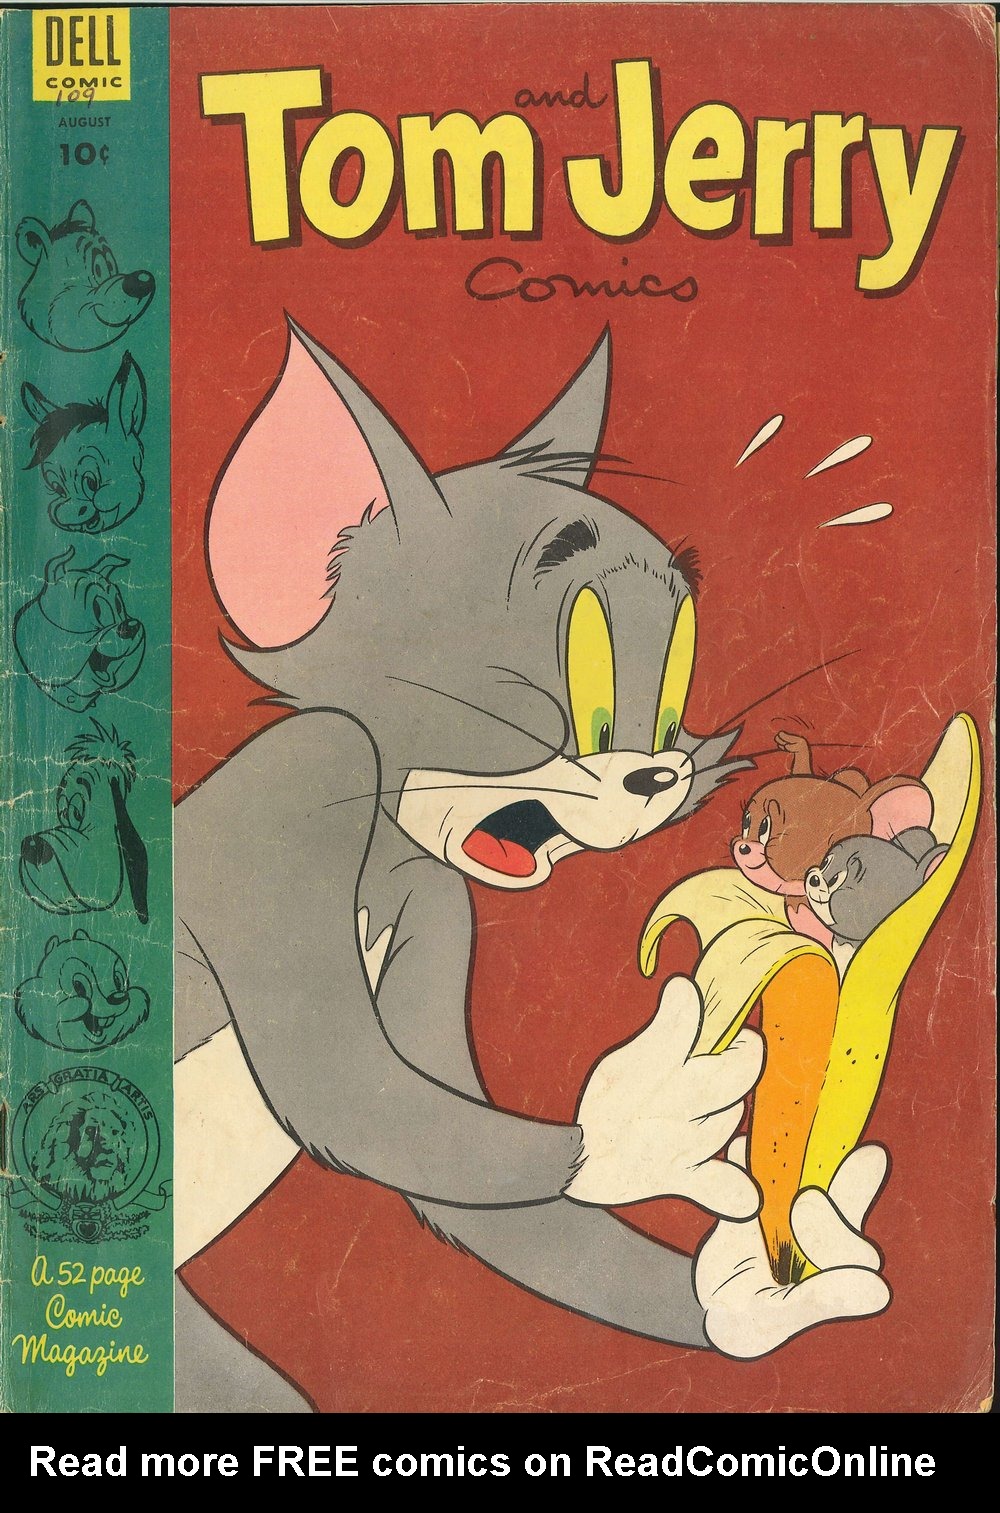 Tom Jerry Comics Issue 109 | Read Tom Jerry Comics Issue 109 comic online  in high quality. Read Full Comic online for free - Read comics online in  high quality .|